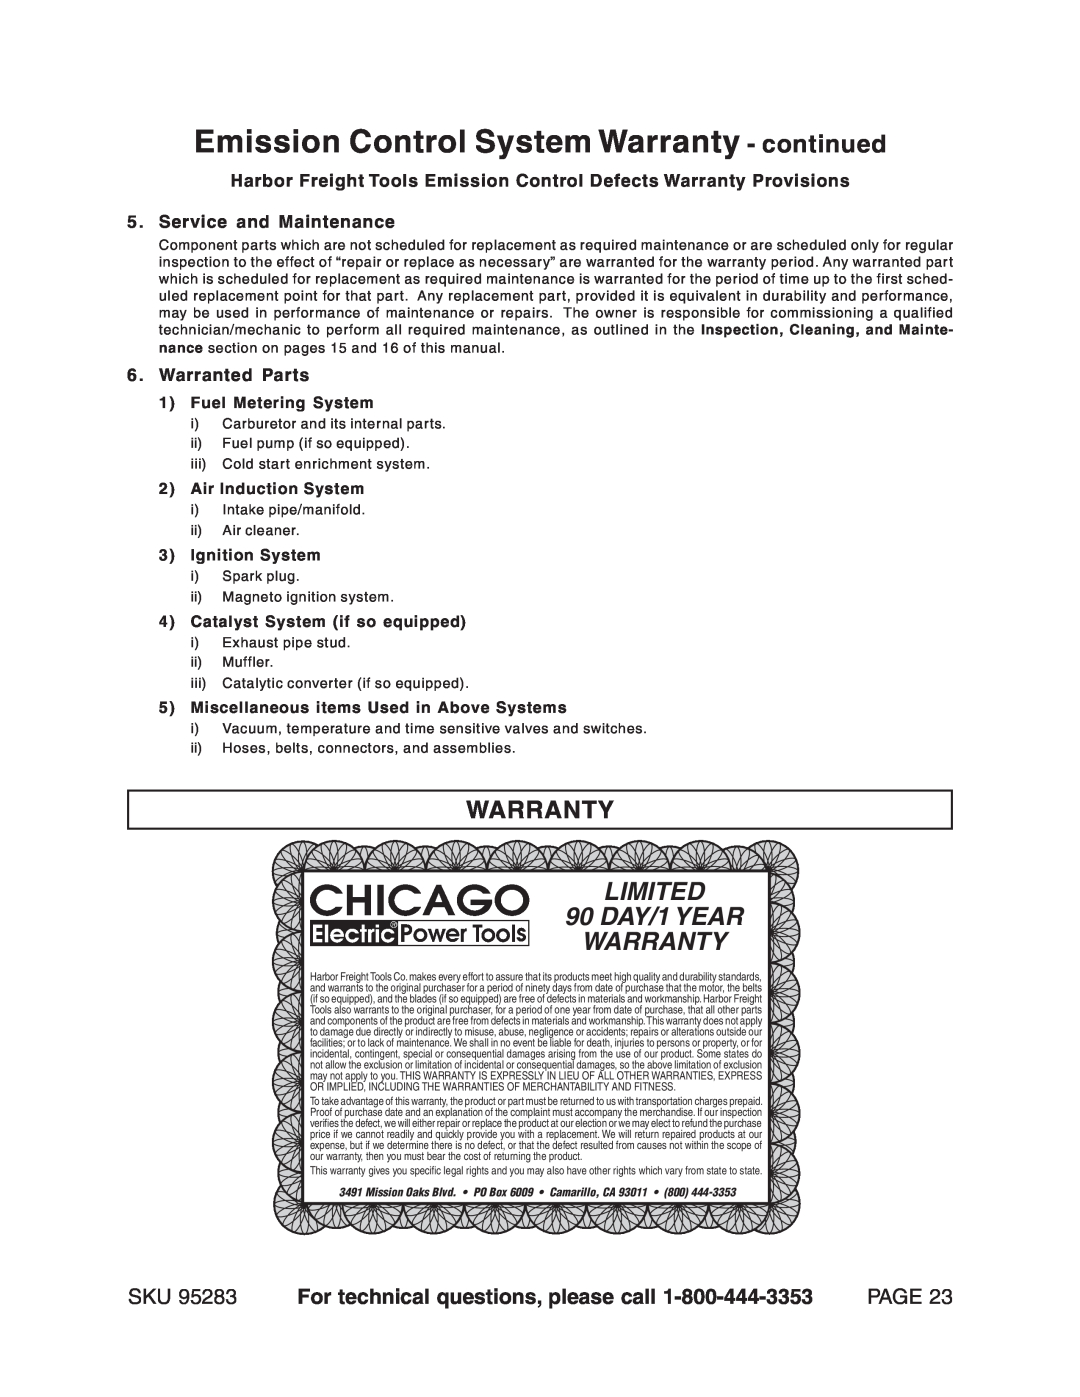 Chicago Electric 95283 Emission Control System Warranty - continued, LIMITED 90 DAY/1 YEAR WARRANTY, Page, Warranted Parts 